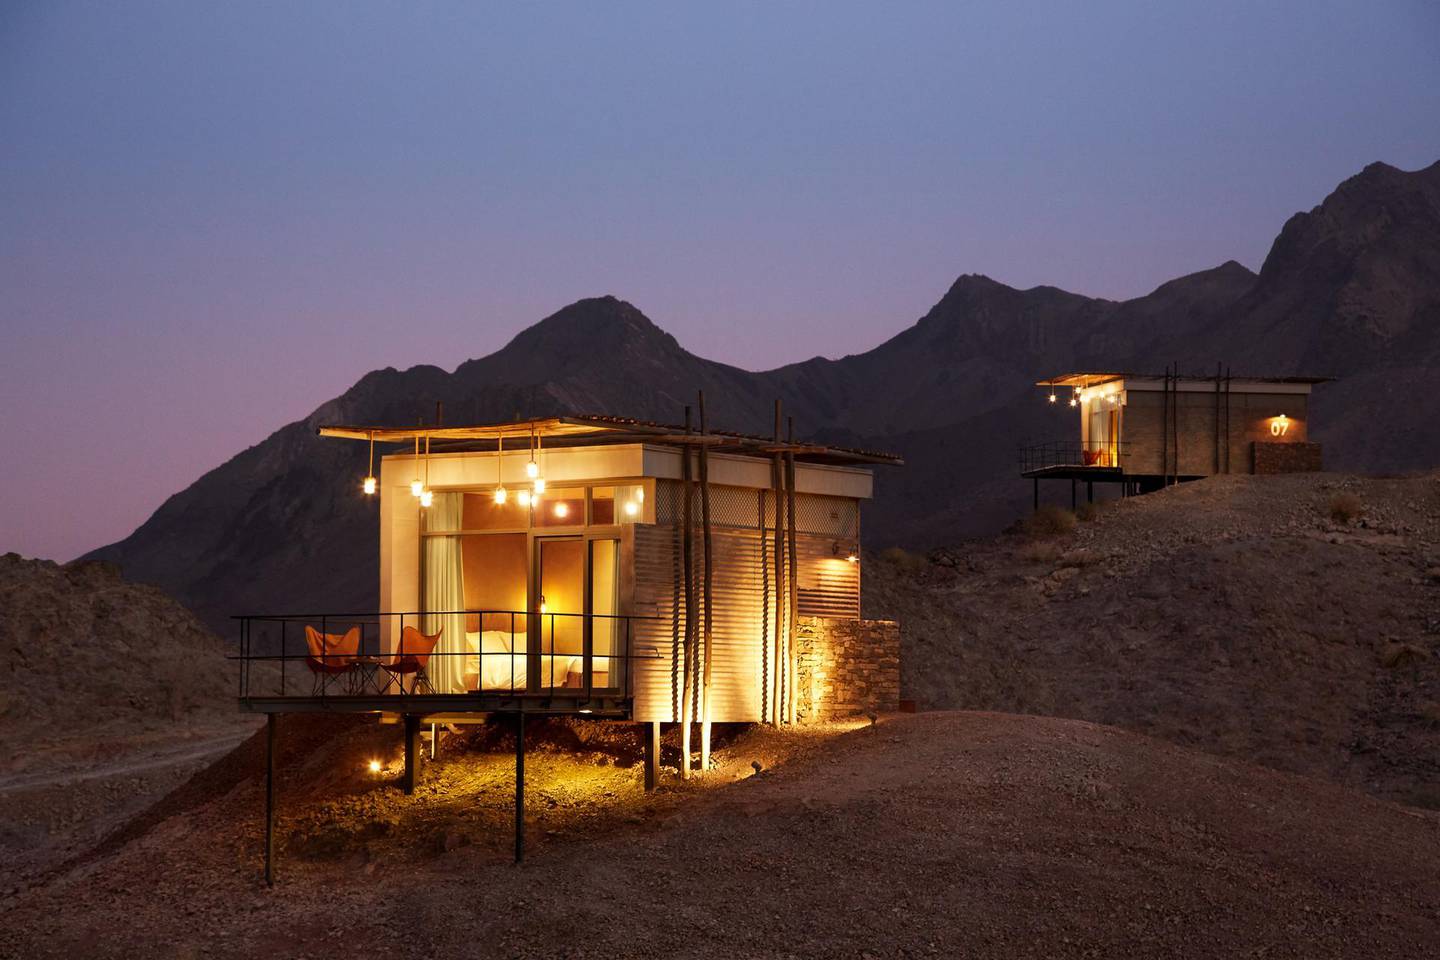 The Hatta Damani lodges start from Dh250, and are close to Hatta Wadi Hub. 